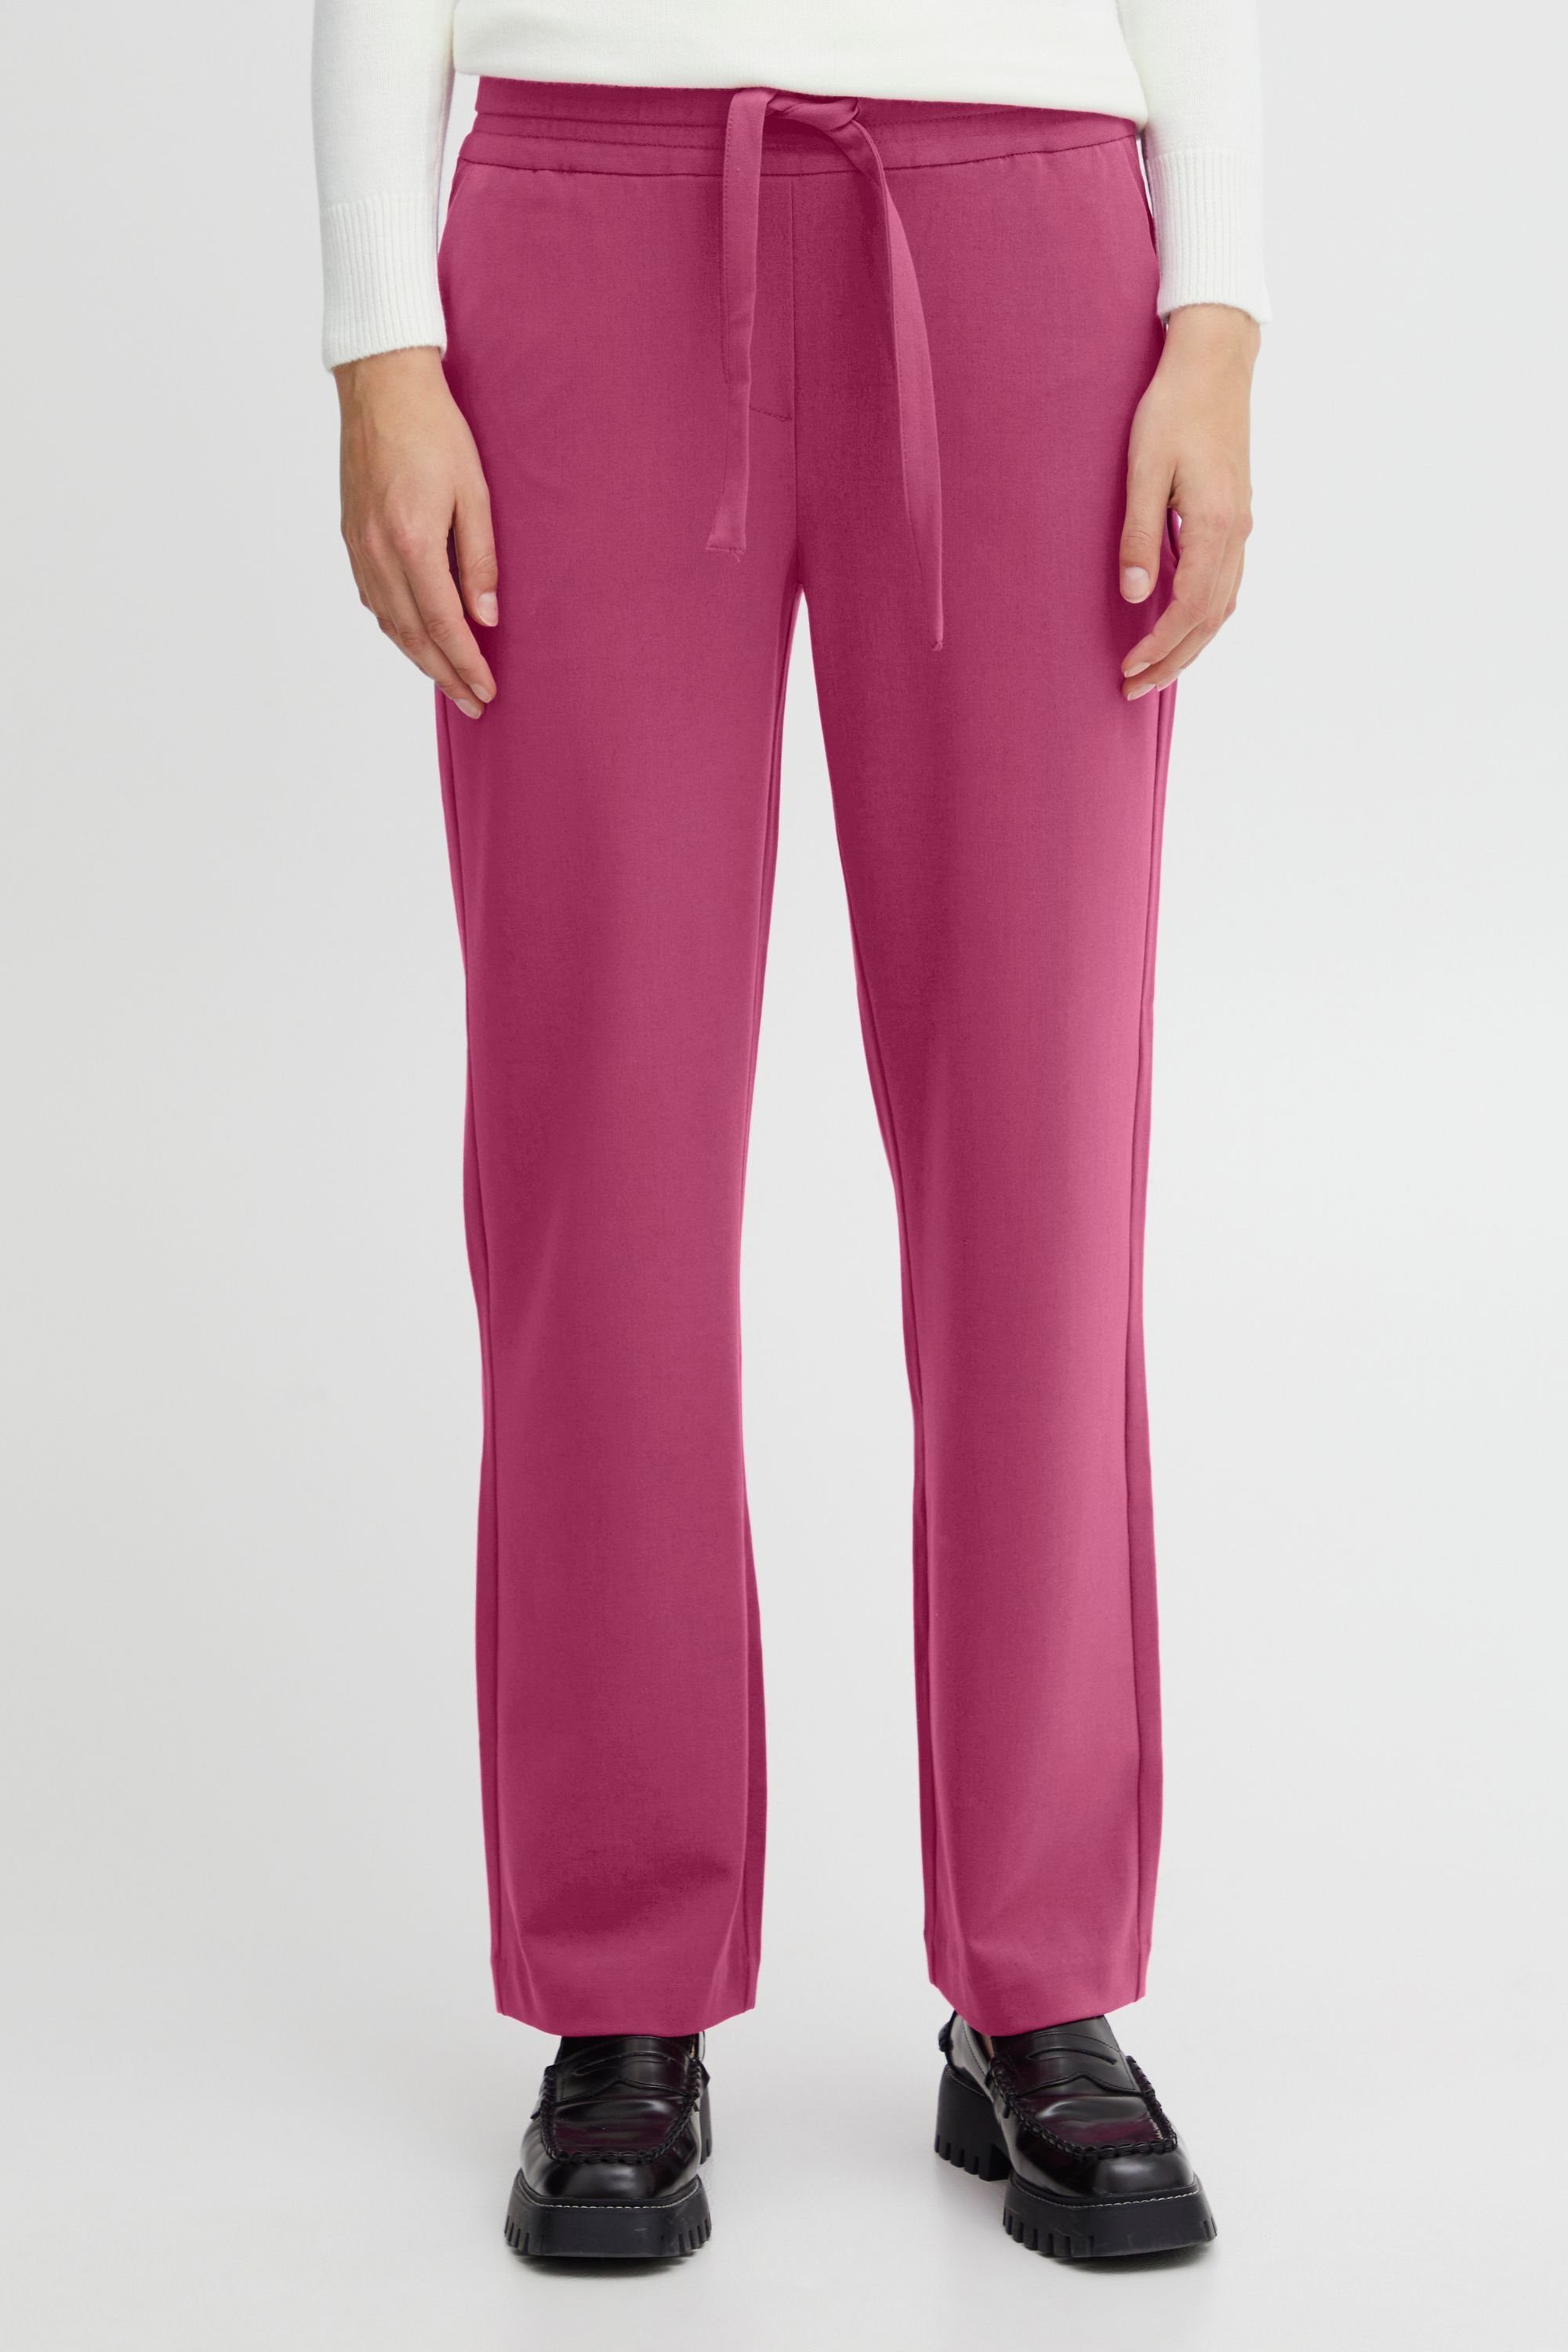 Fuchsia CASUAL b.young Red Pants (182328) 20813077 Jogger BYDANTA Y PANT -